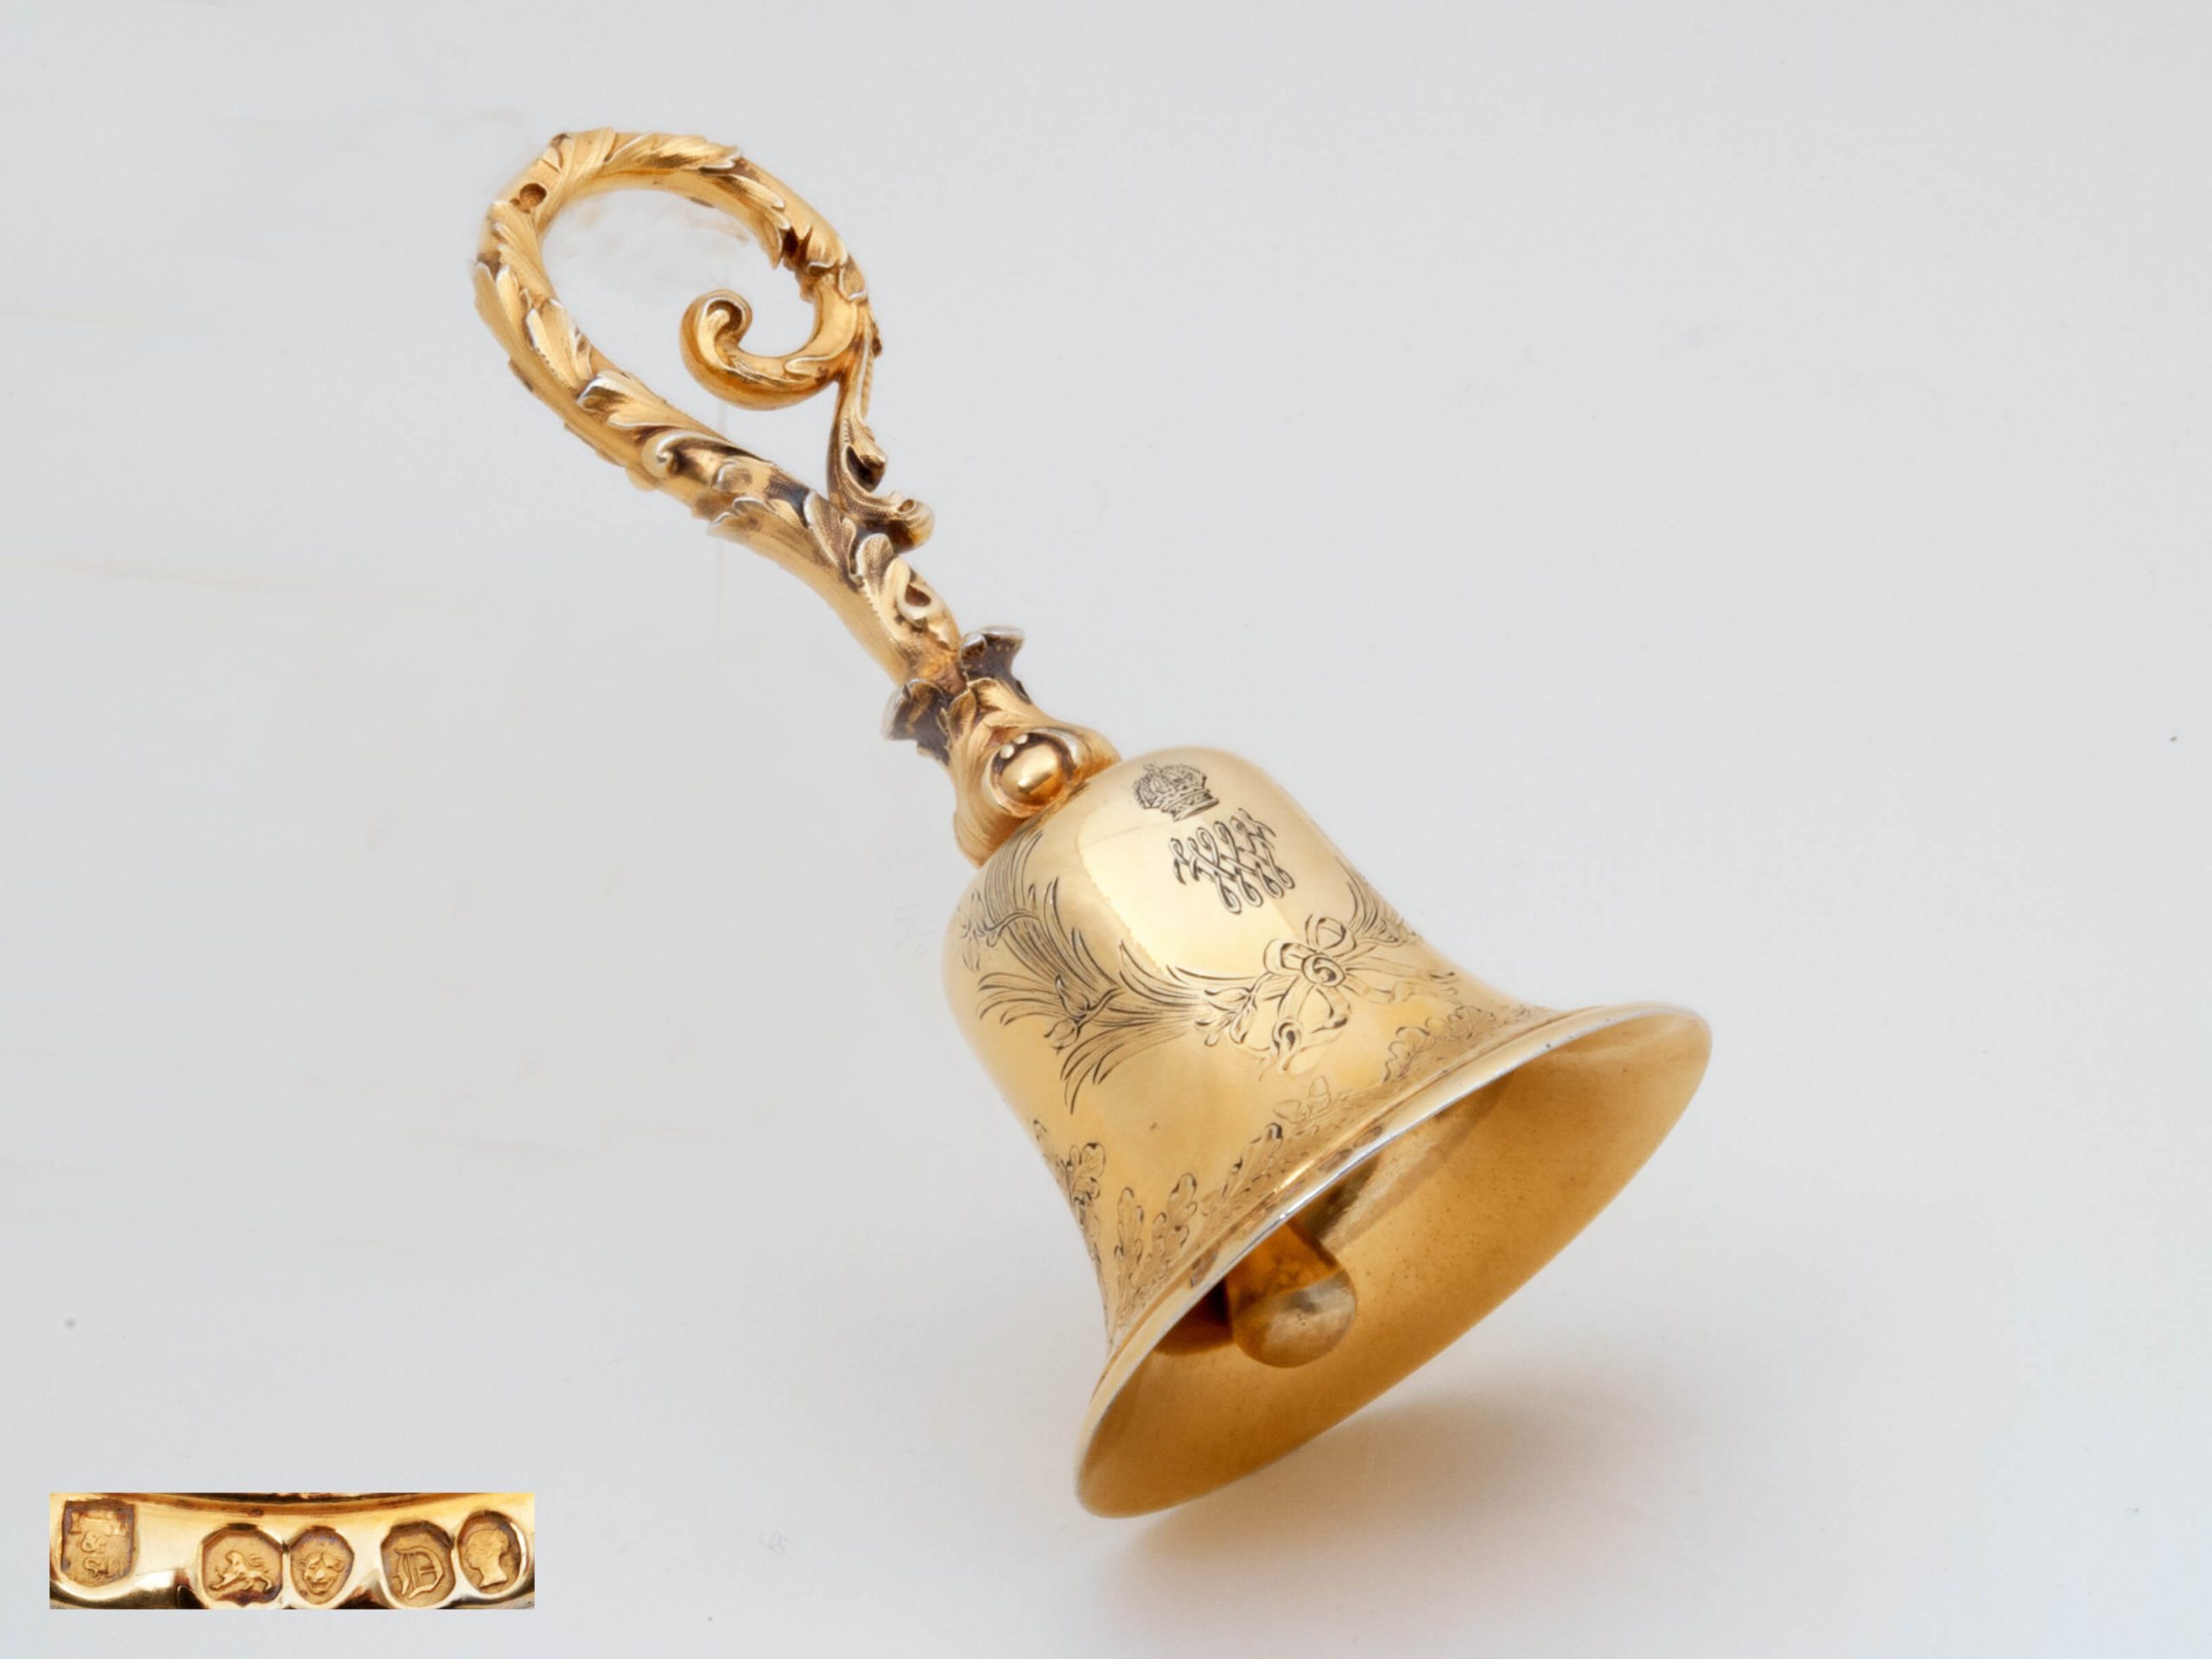 royal silver-gilt antique table-bell